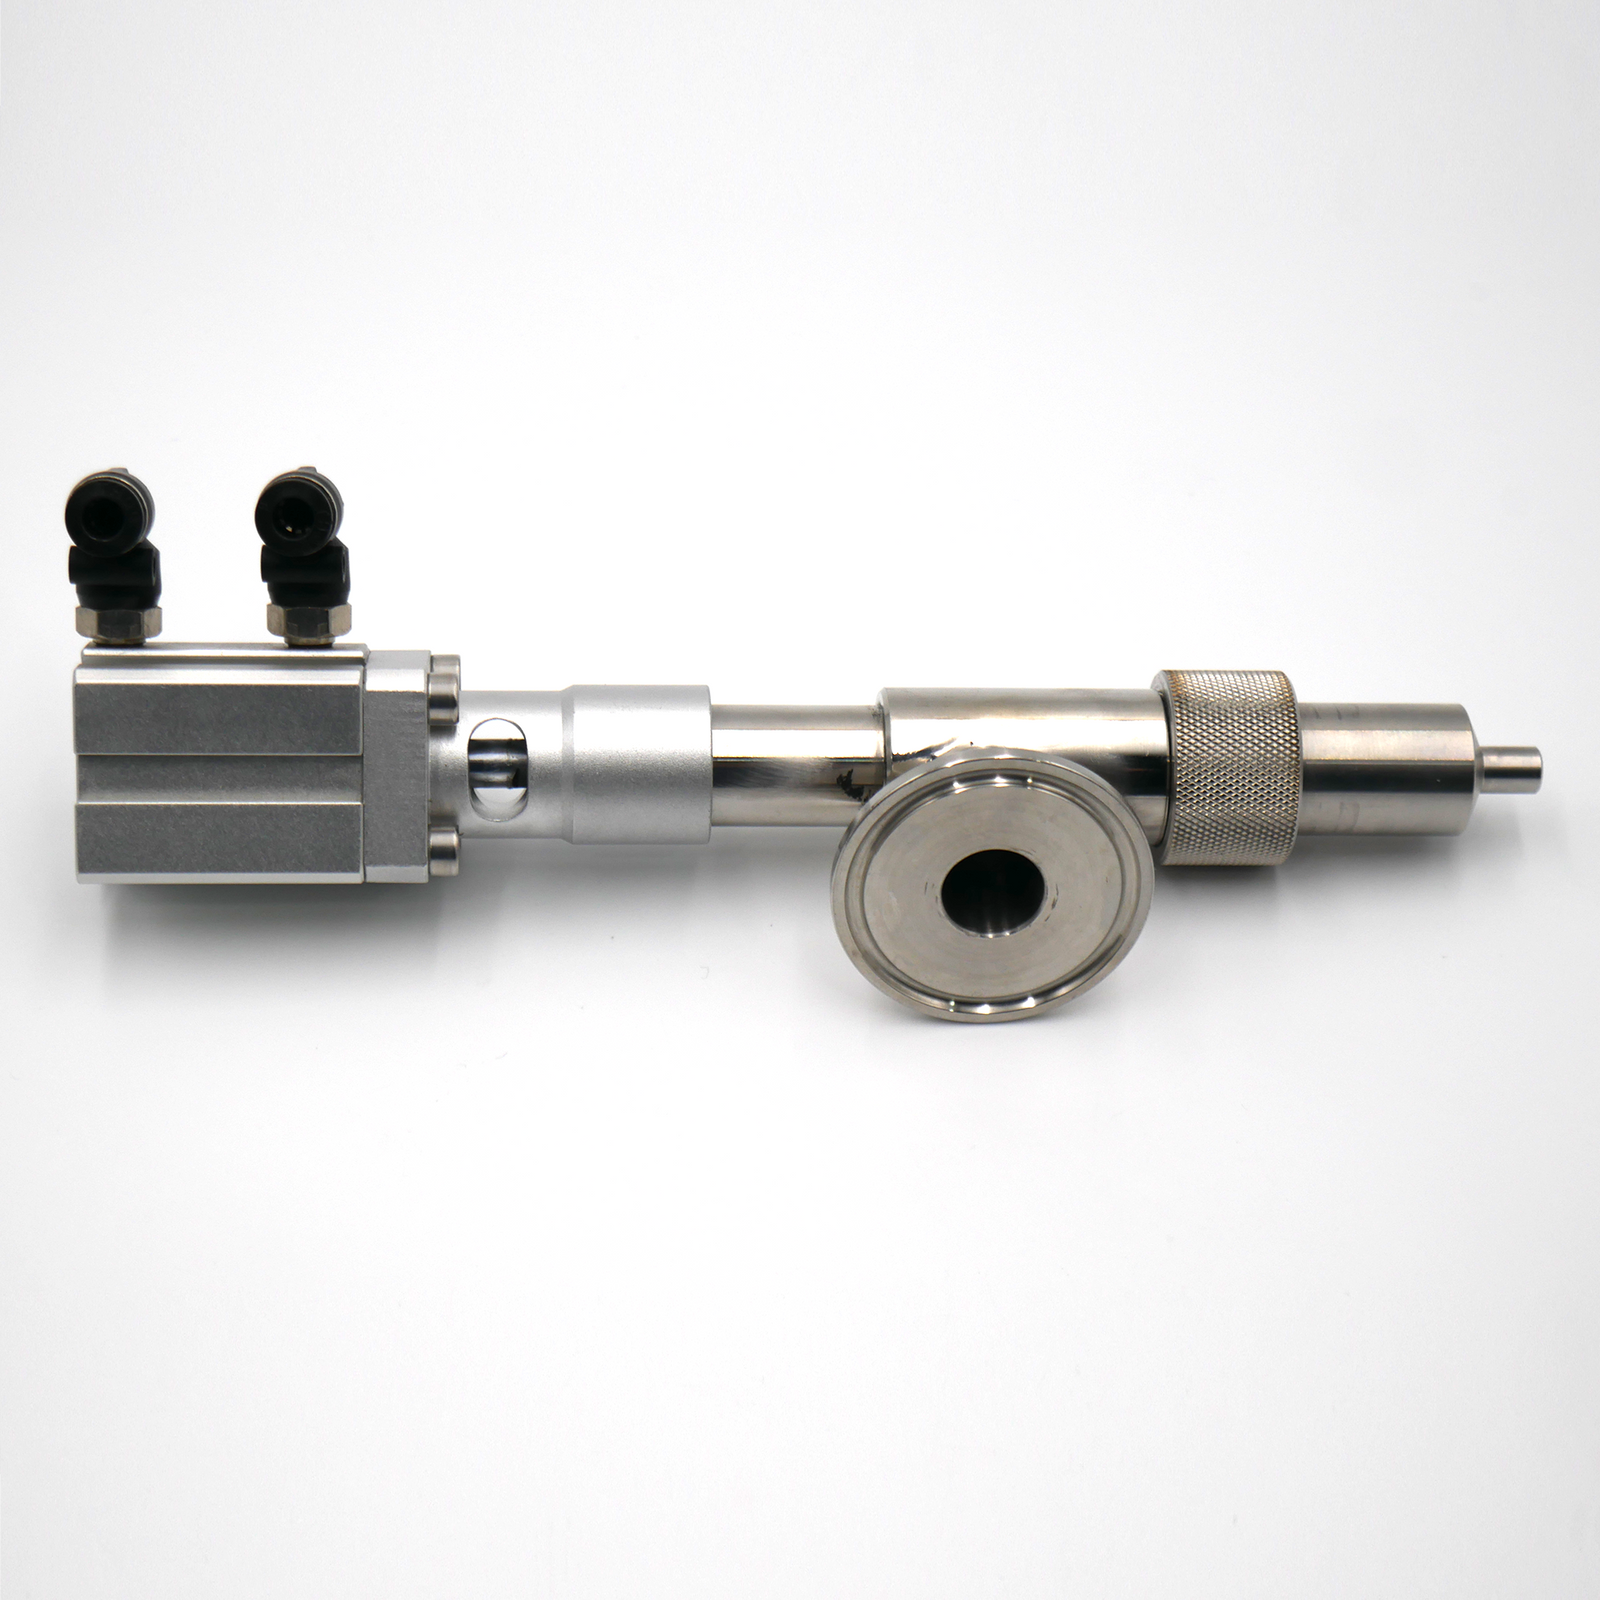 12mm dispensing nozzle assembly